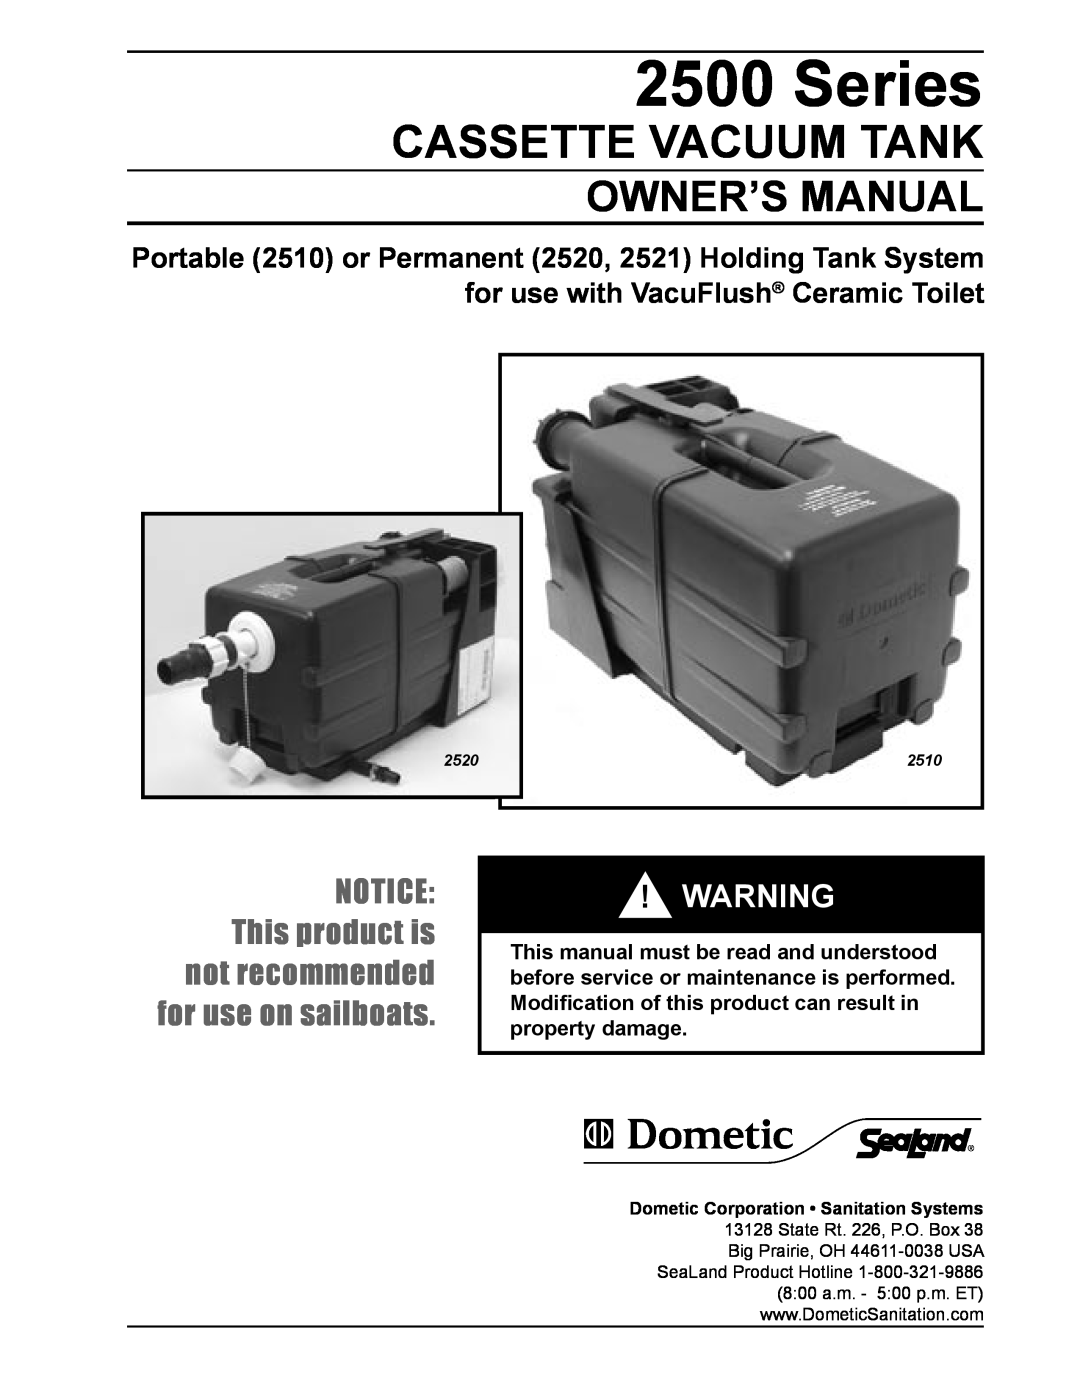 SeaLand 1 2500 Series owner manual Cassette Vacuum Tank, NOTICE This product is not recommended, for use on sailboats 